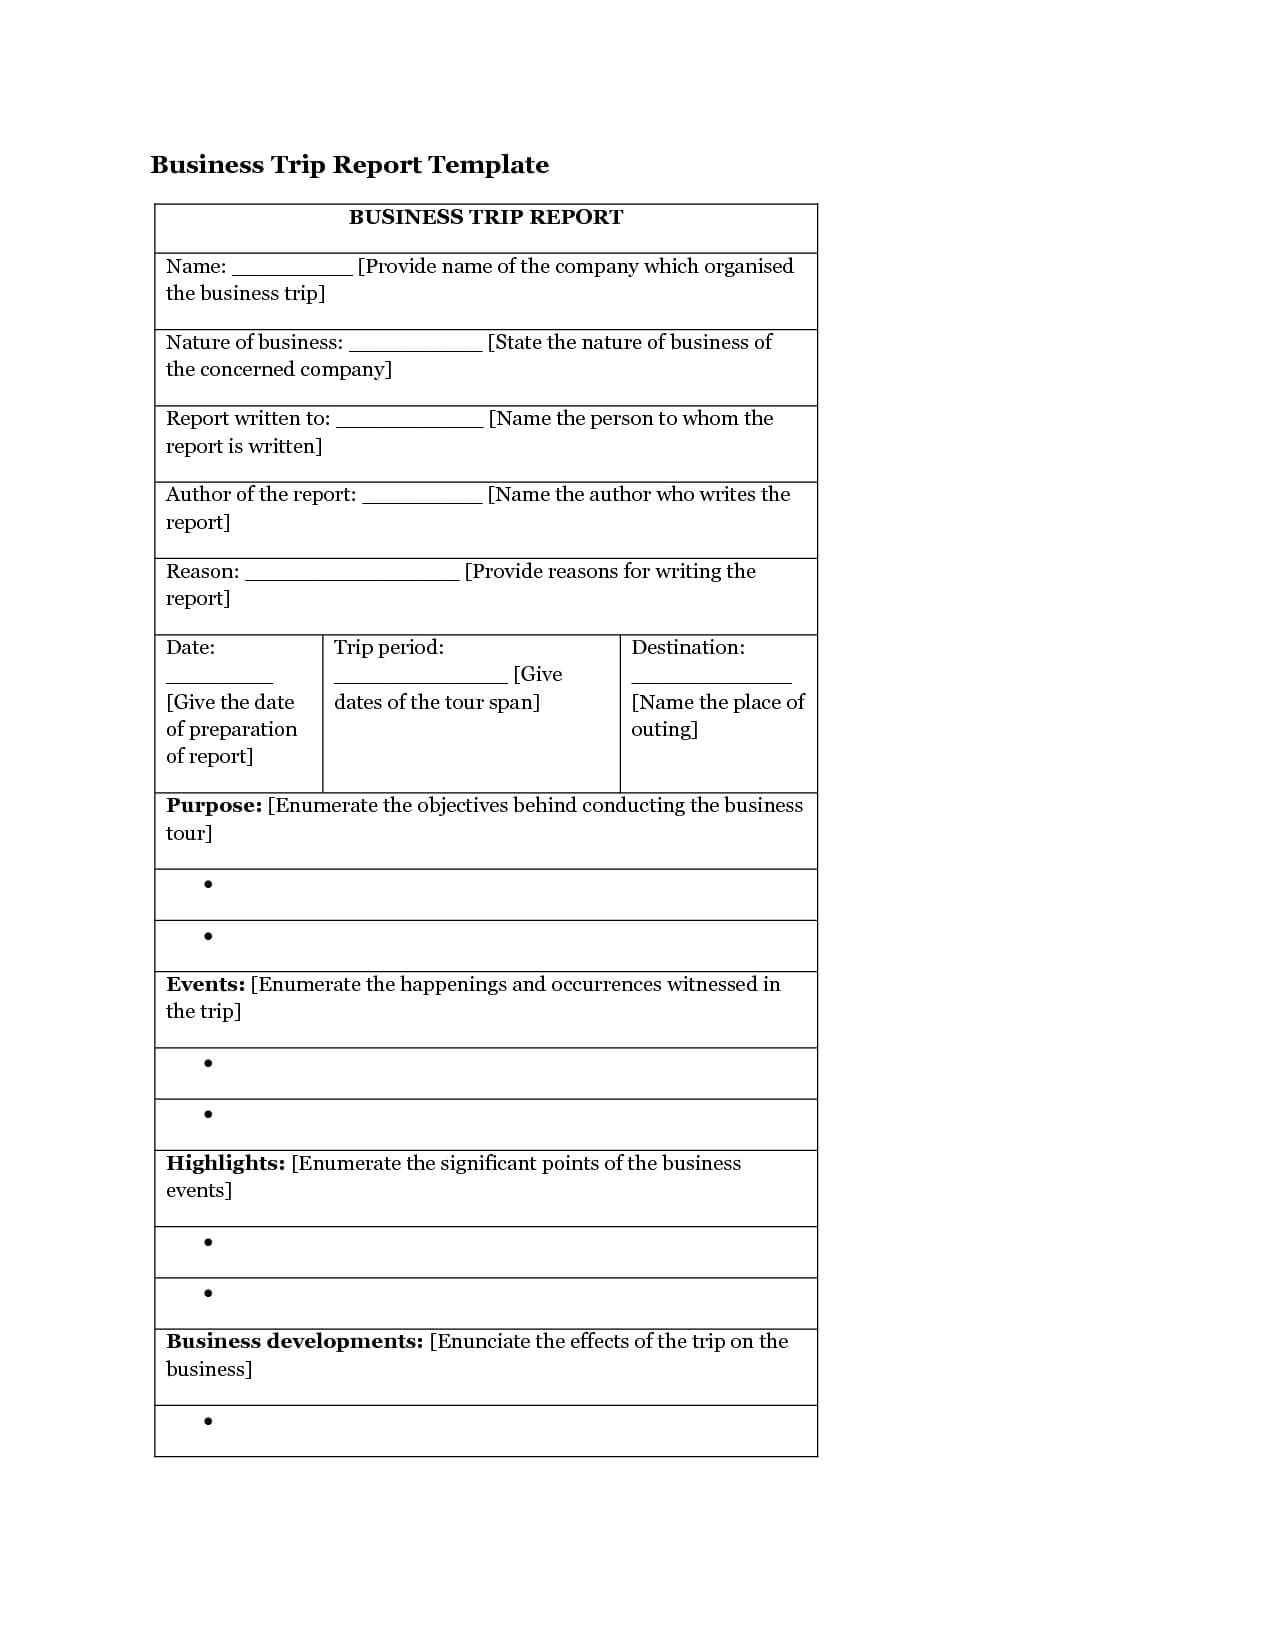 Business Trip Report Template - Cumed Intended For Business Trip Report Template Pdf